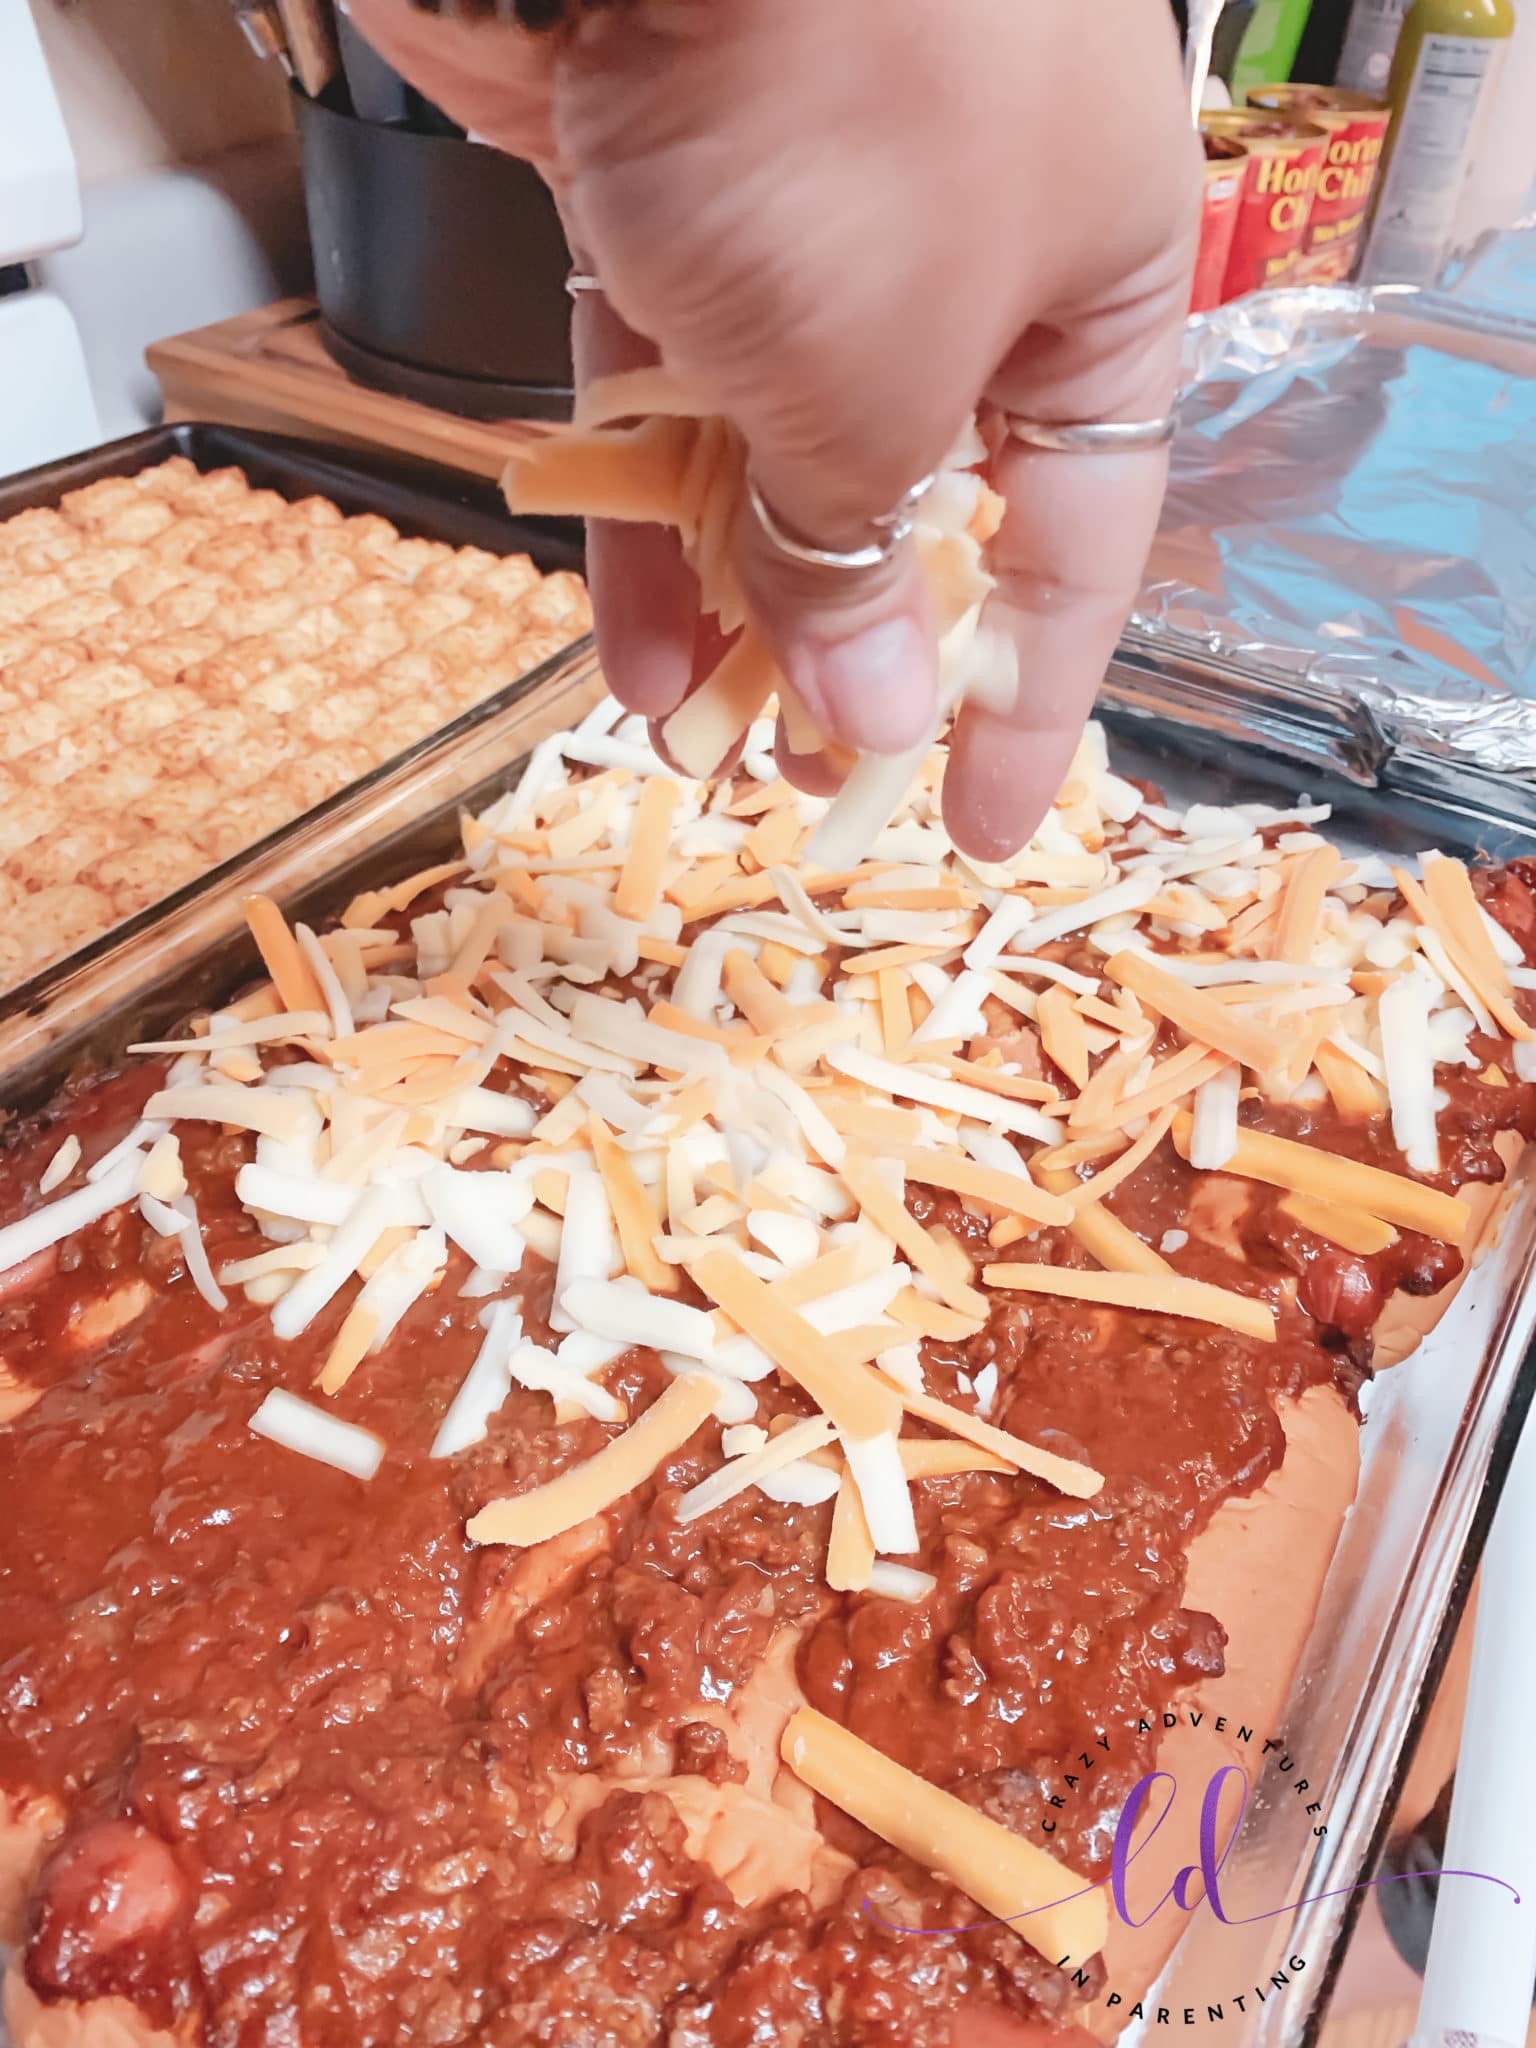 Add Cheese to Easy Baked Chili Cheese Hot Dogs